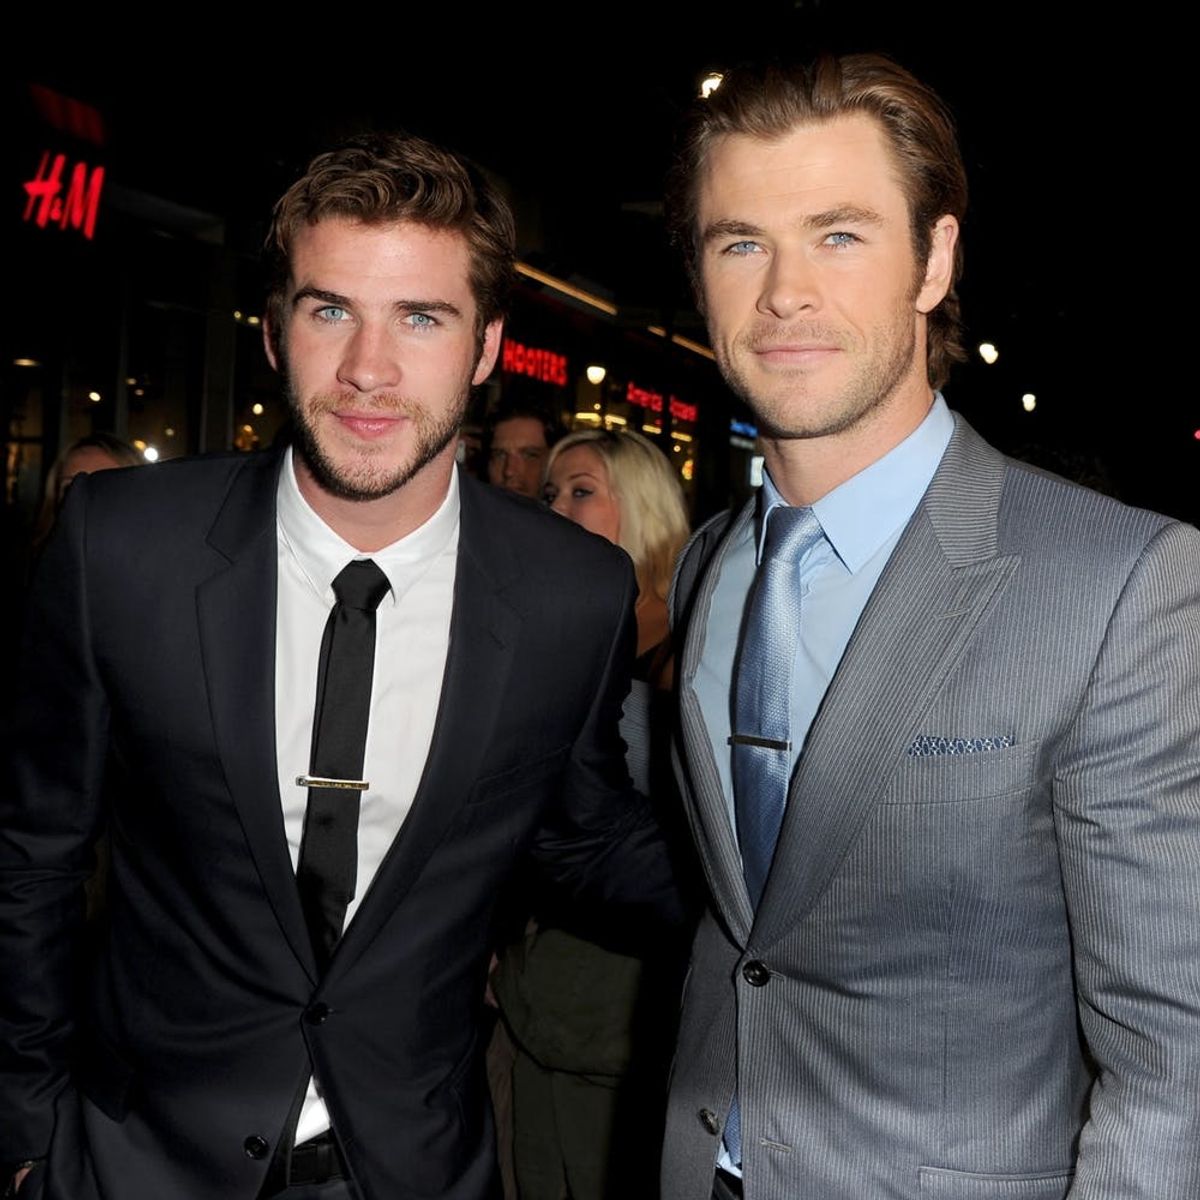 Chris Hemsworth Almost Lost the Role of Thor to His Younger Brother Liam